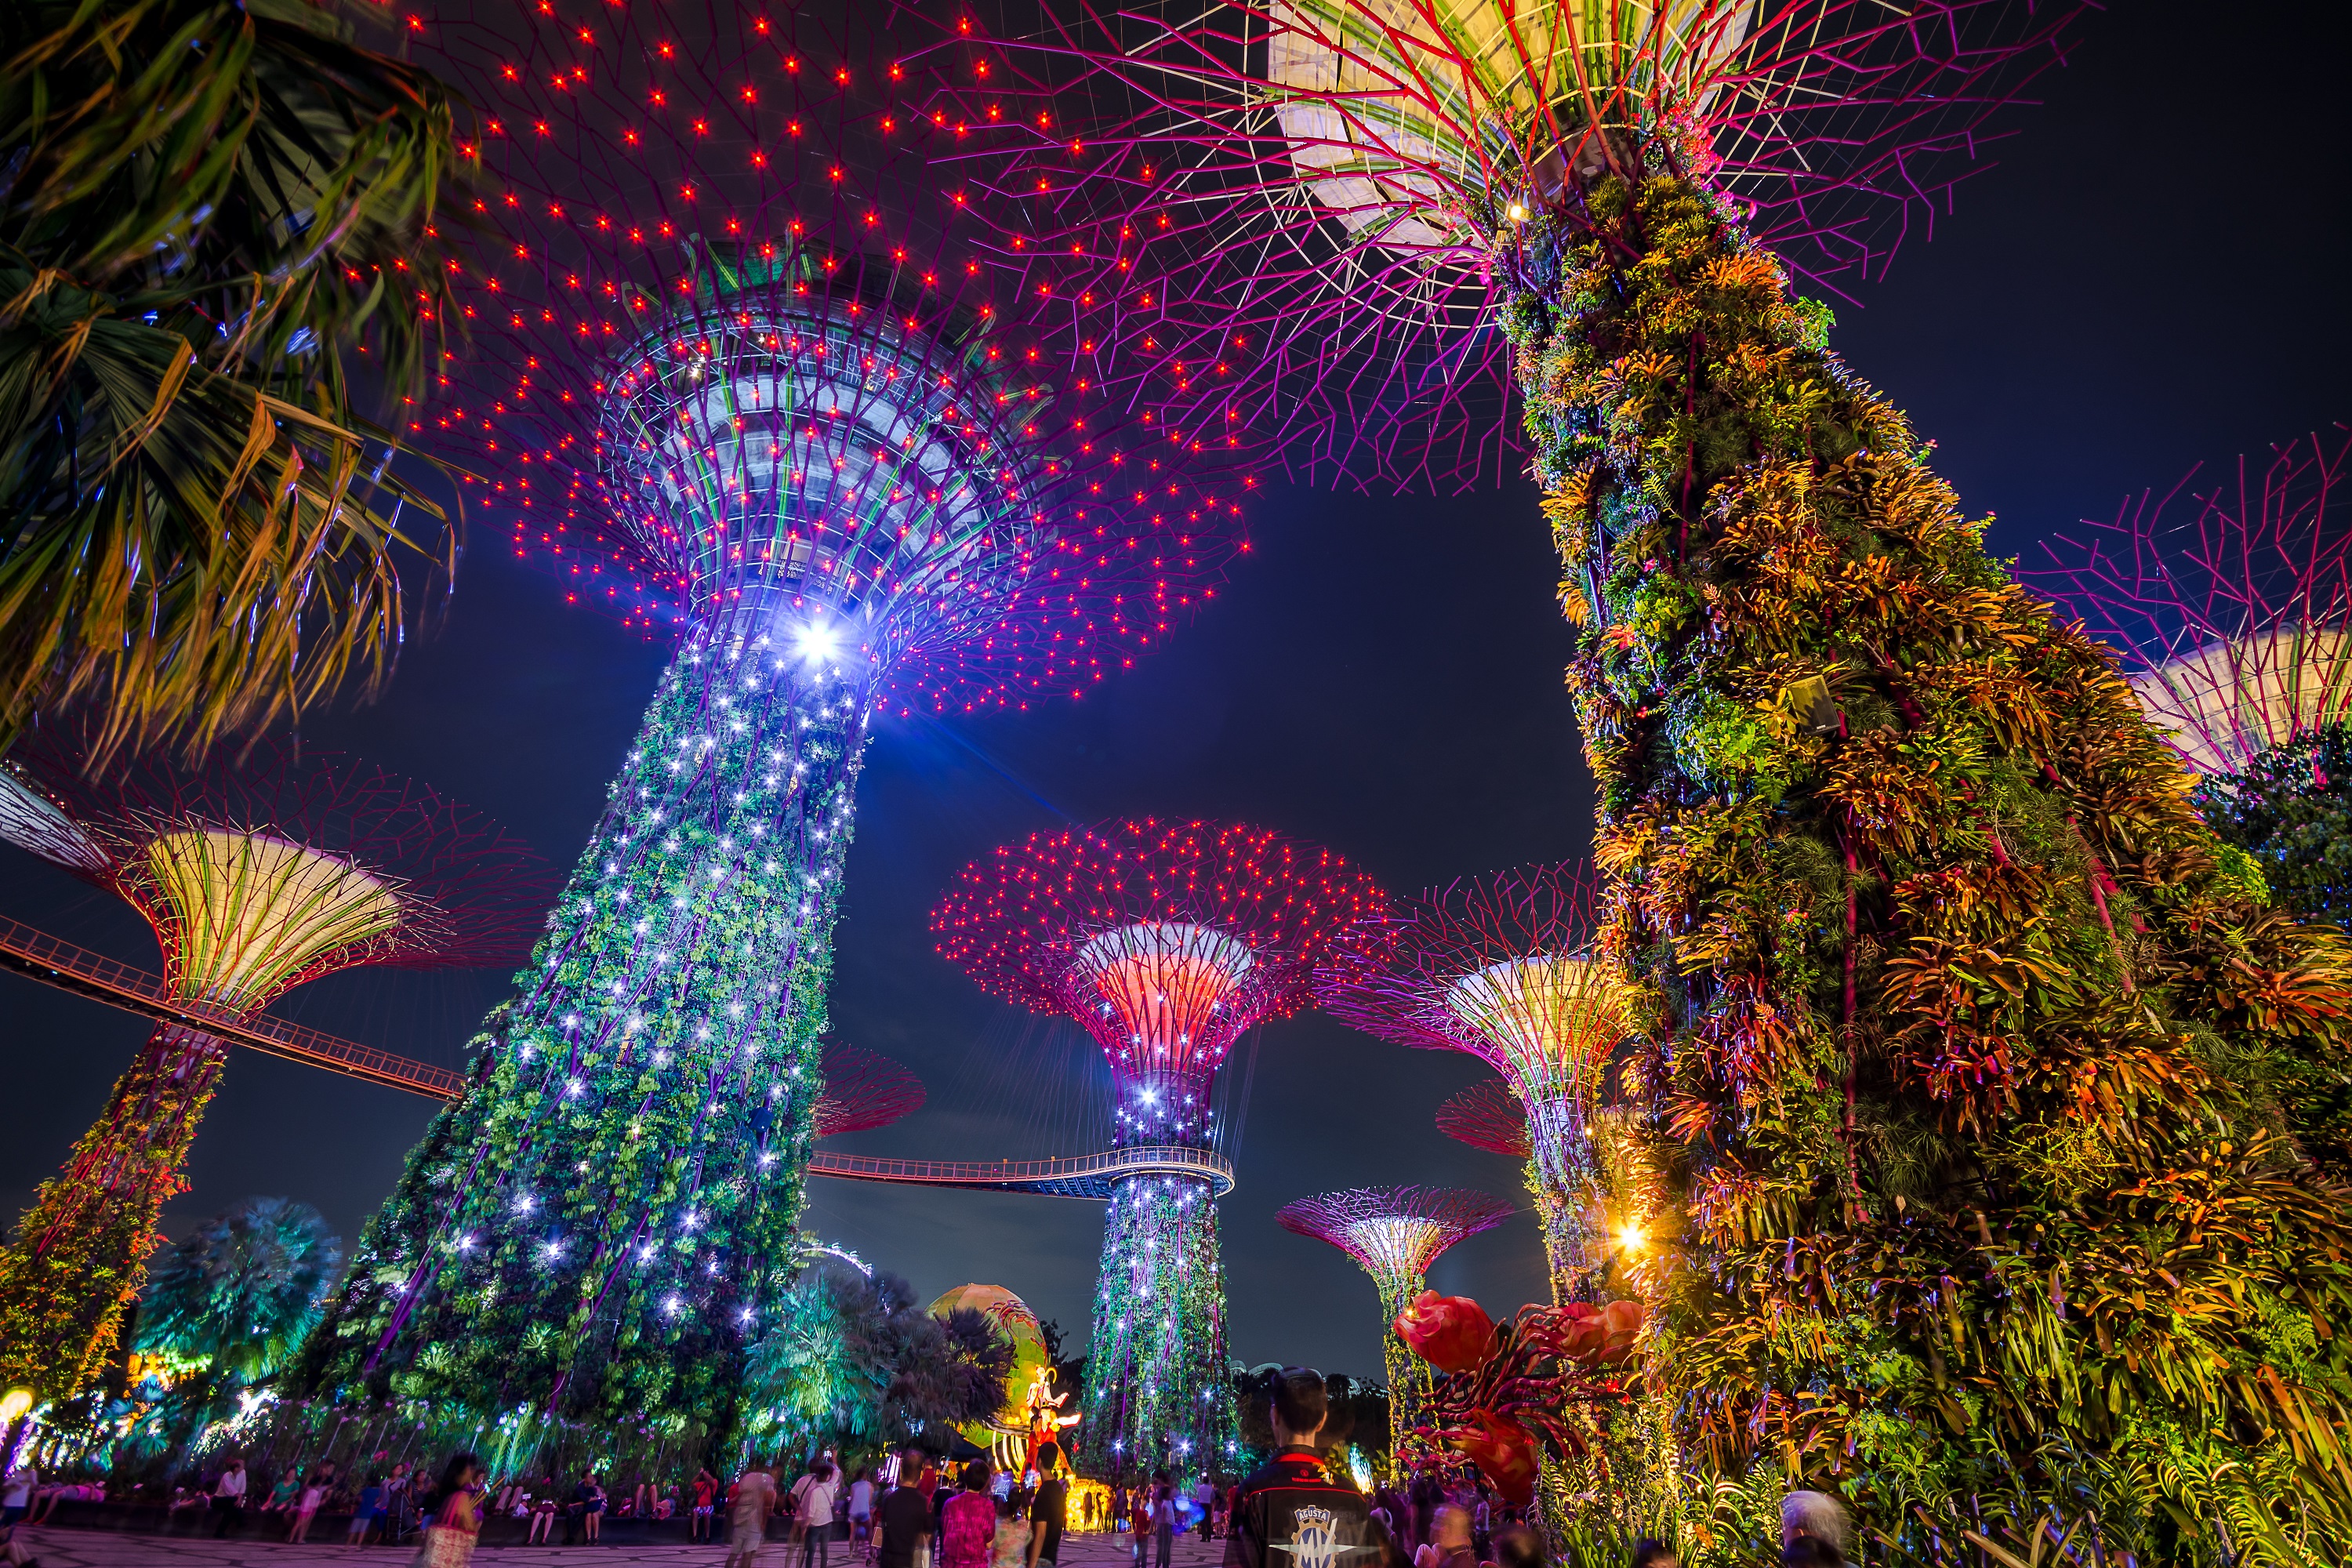 Singapore Blooms as a real City in Nature